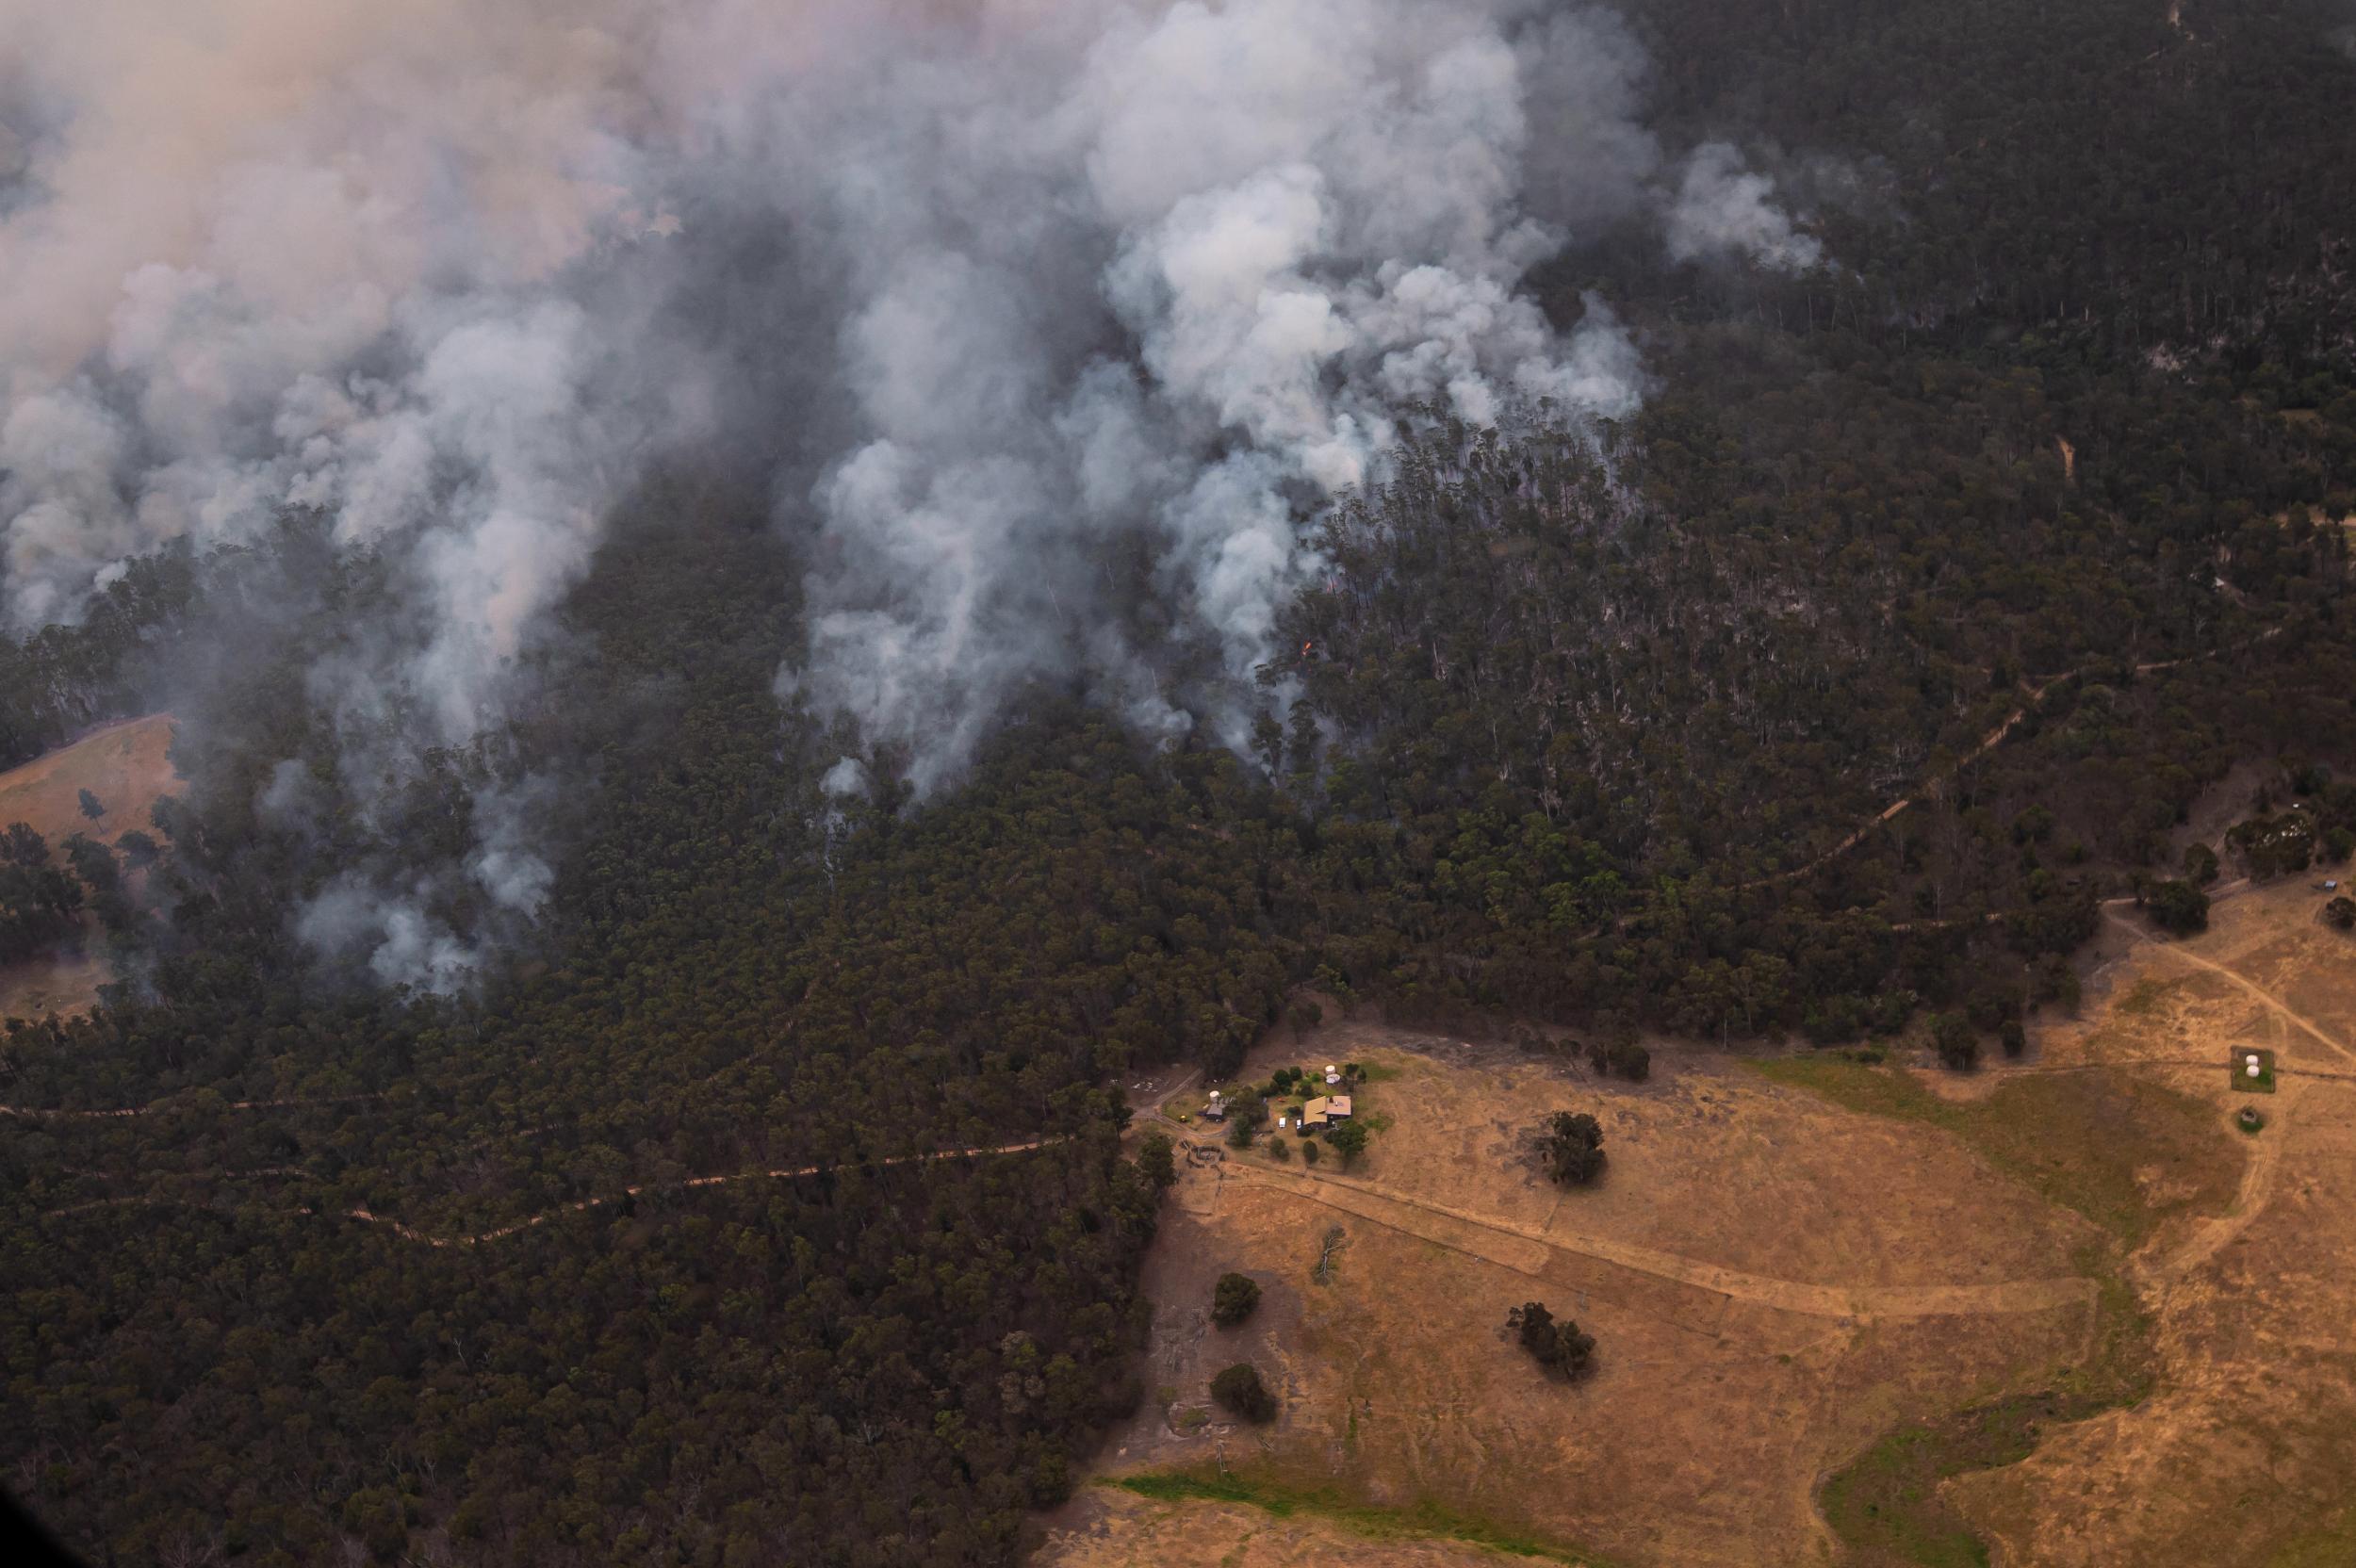 Property under threat from the East Gippsland fires in Victoria